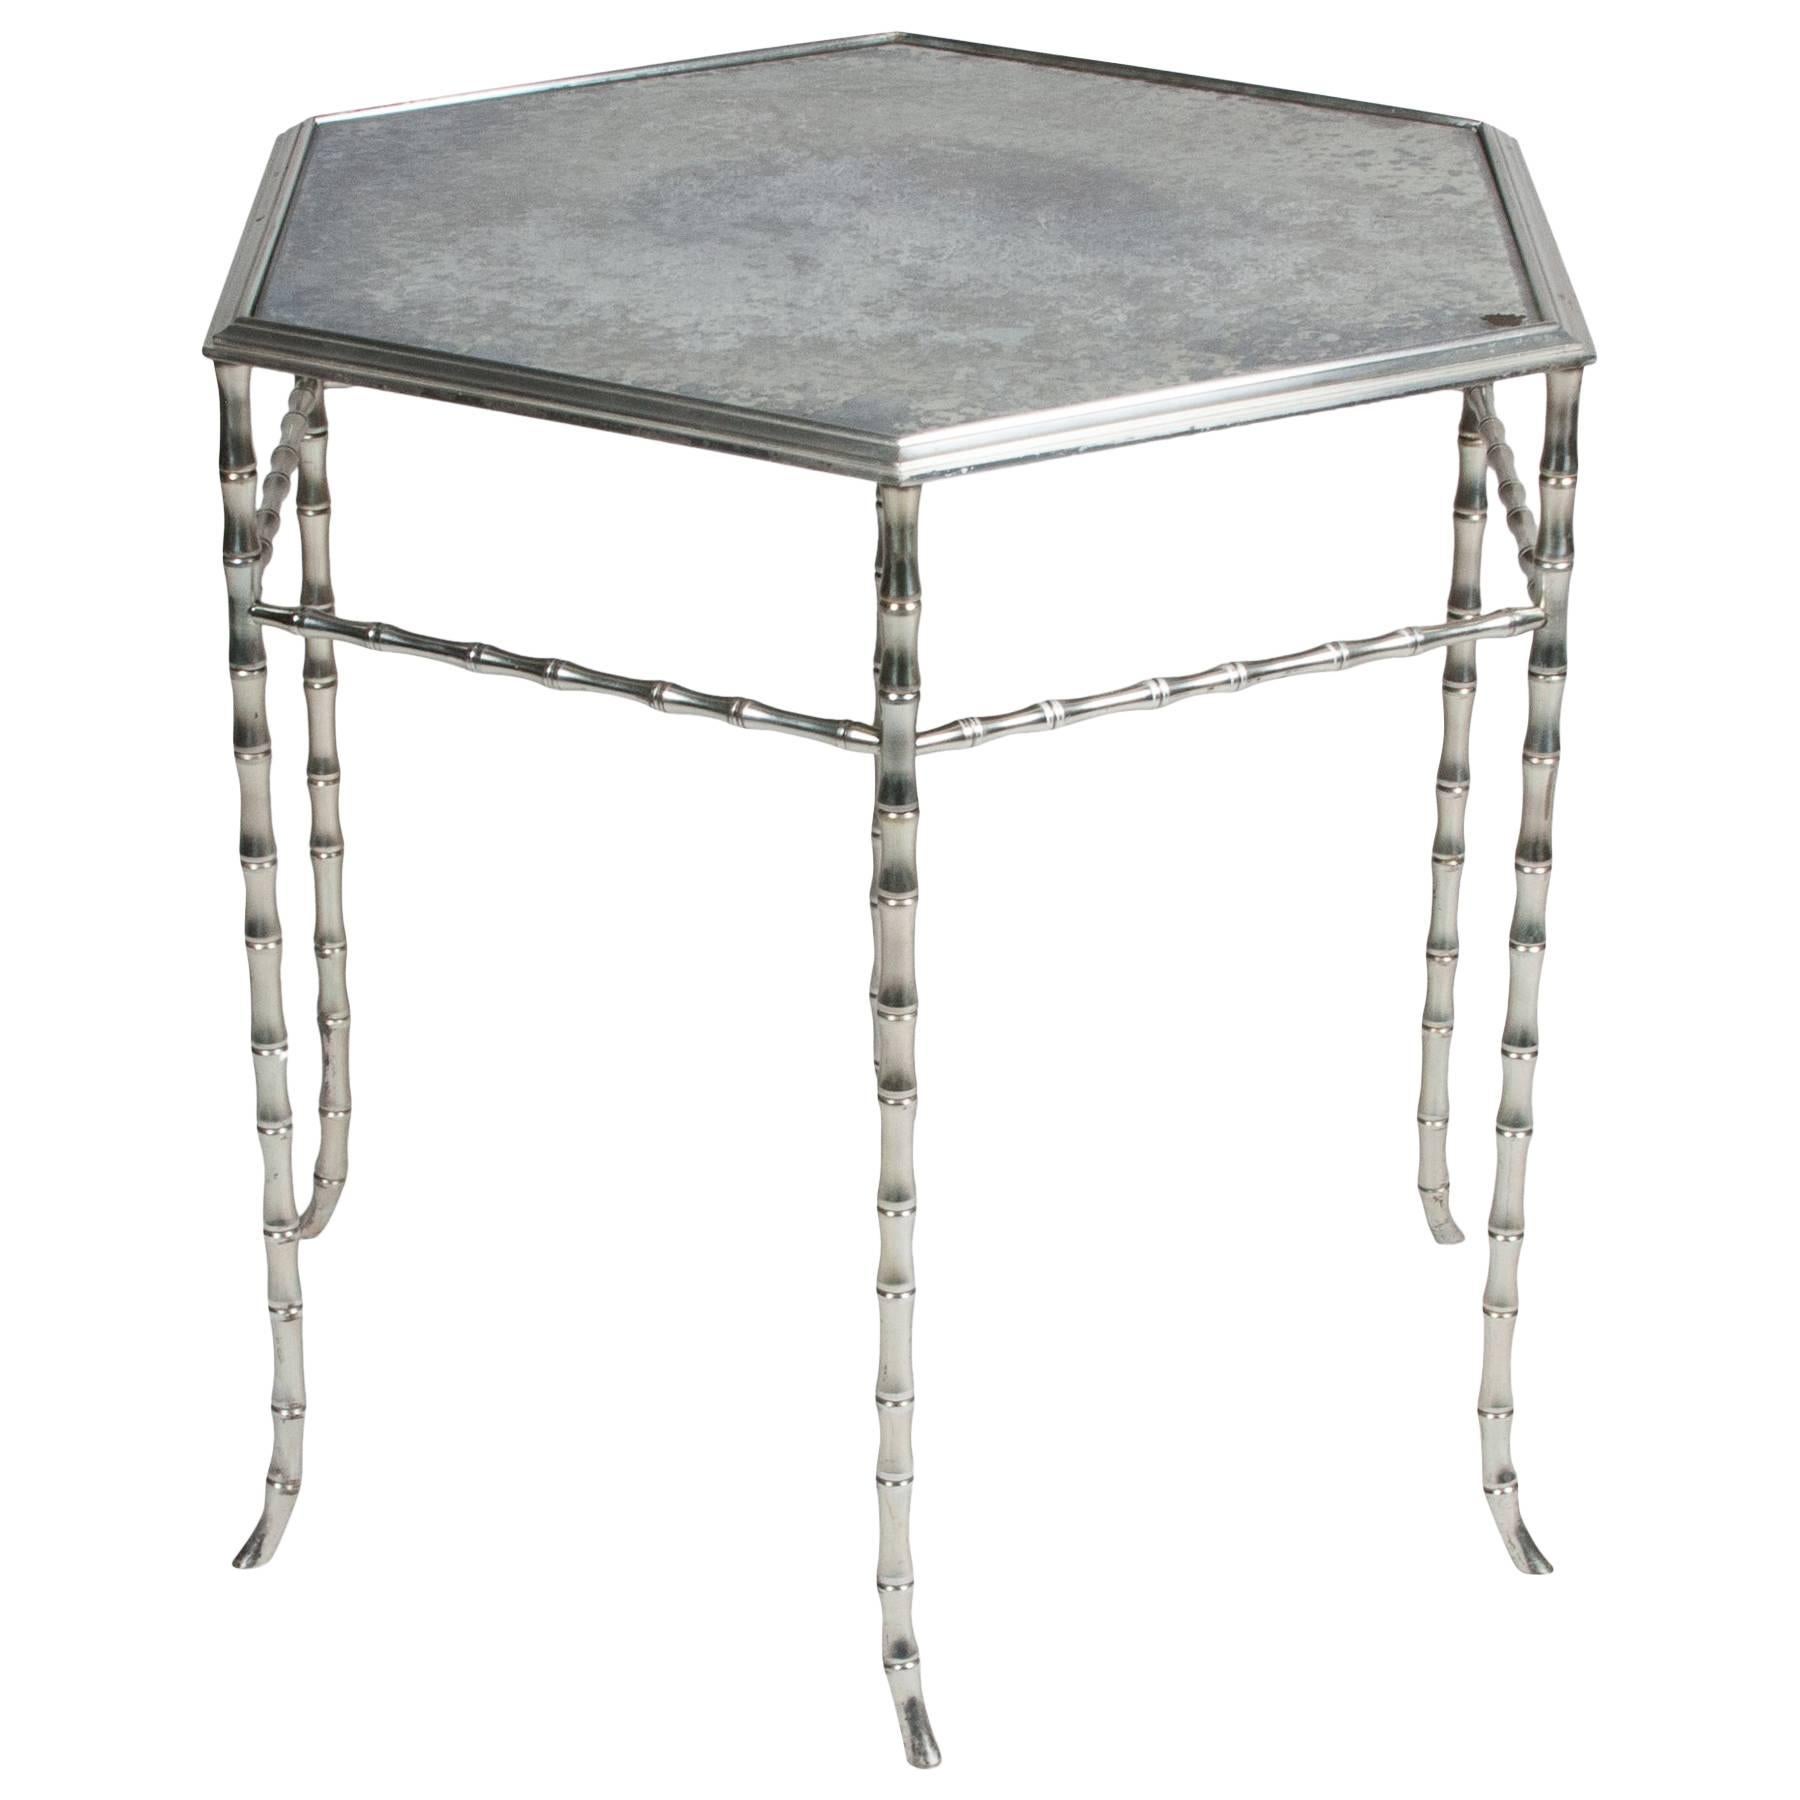 Hexagonal Chrome Table with Antiqued Mirror Top by Bagues